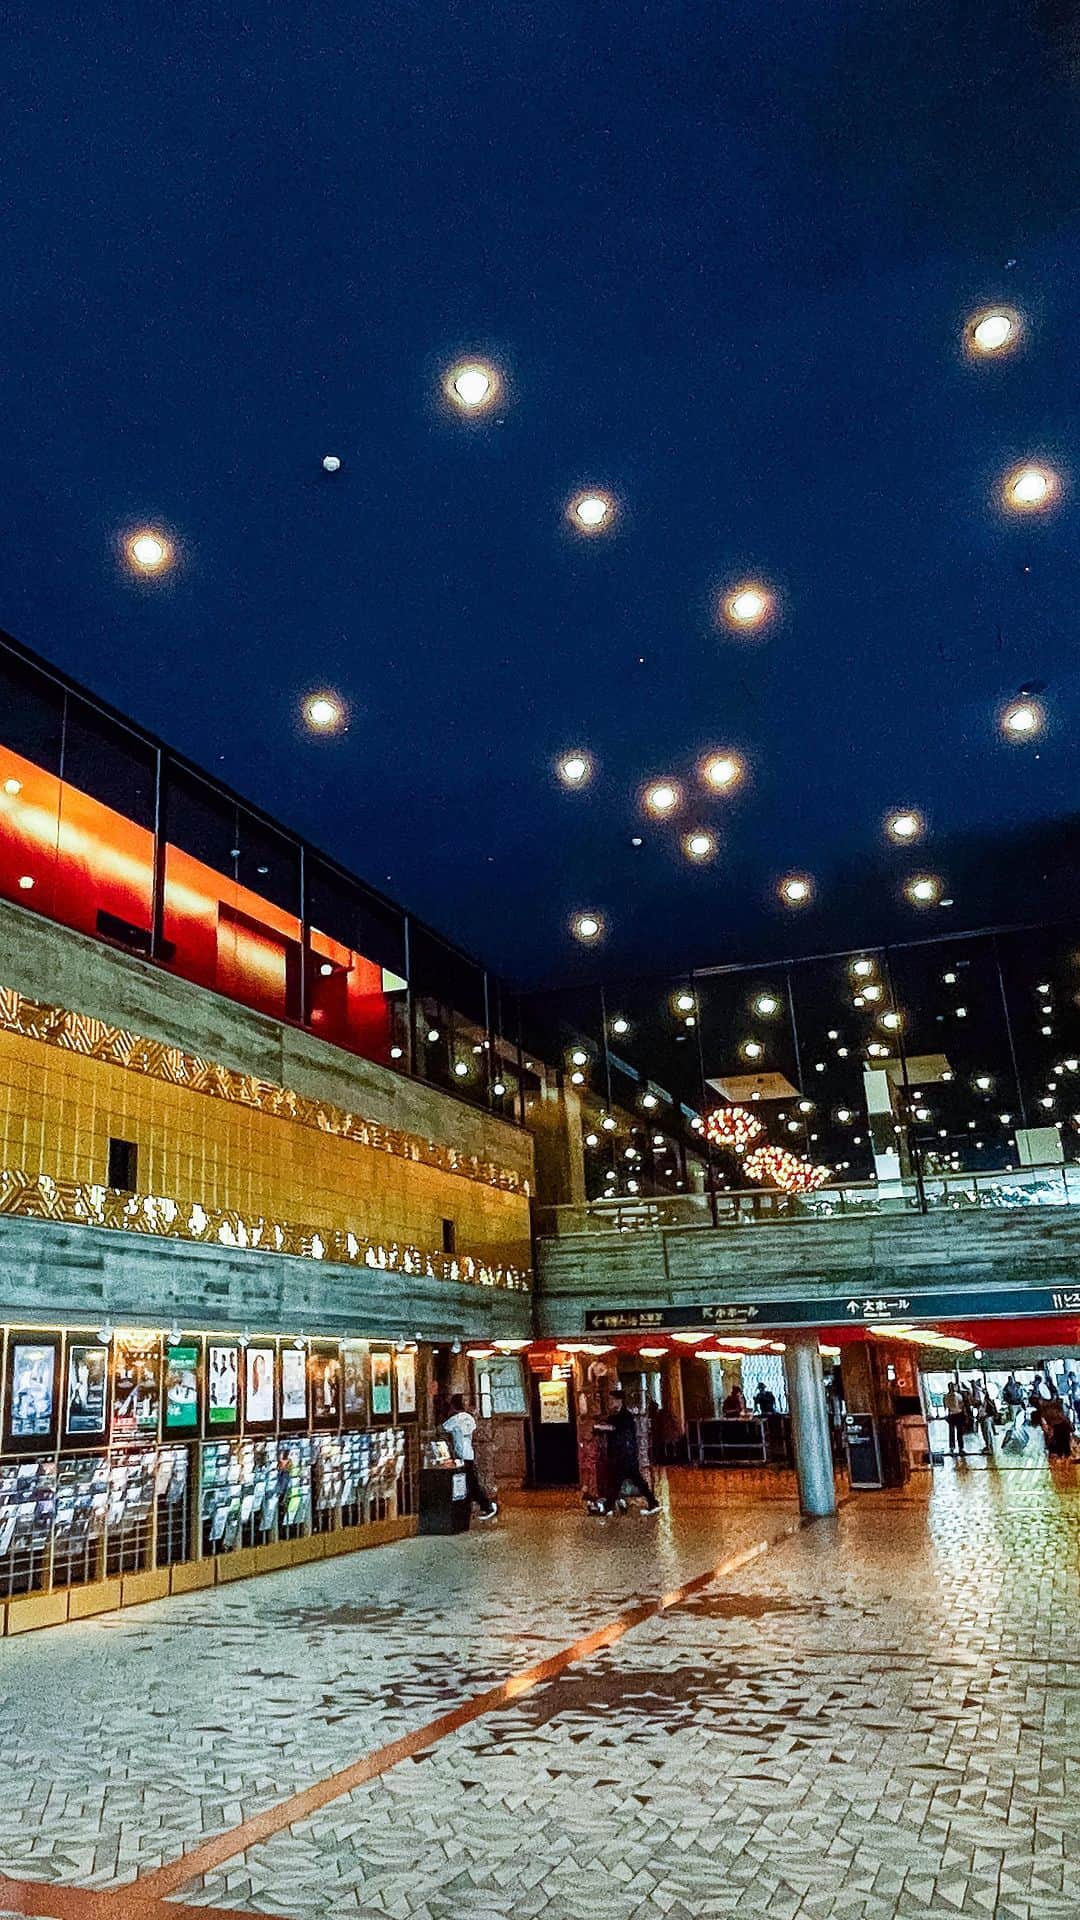 Promoting Tokyo Culture都庁文化振興部のインスタグラム：「Have you ever gazed up at the ceiling of a building?   Sometimes, you can discover new aspects of its architectural charm by doing so.   Consider the Tokyo Bunka Kaikan in Ueno, a building erected in 1961 to commemorate Tokyo's 500th anniversary and symbolise postwar reconstruction. The theatre stands among Tokyo's most iconic structures and was crafted by Kunio Mayekawa, a disciple of Swiss-French architect Le Corbusier. One remarkable feature is its ceiling at the entrance, which is adorned with a random arrangement of lights against a deep blue backdrop to resemble a starry sky 🌌   We will continue introducing Tokyo architecture in our "If you look up" series. Please look forward to it!   -   建物の天井を見上げてみたことはありますか？  少し意識をして天井の造形を見てみると、その建築の魅力を新しく発見できるもしれません。   今回訪れたのは、上野にある東京文化会館。  1961年、東京都開都500年を記念すると共に「戦後復興の象徴」という意図も込められて建設された、東京を代表する名建築です。  劇場の設計はル・コルビュジエの弟子であった前川國男氏が手がけました。  照明がランダムに配置されたエントランスロビーの天井は星空をモチーフにしており、その深みのある青色は「成層圏ブルー」とも称されています🌌   今後も、見上げることから都内の建築をご紹介する「If you look up」シリーズをお届けしていきます。ぜひご期待ください。   #tokyoartsandculture  #ifyoulookup    #tokyobunkakaikan #kuniomayekawa #東京文化会館 #前川國男  #tokyoarchitecture #architecturephoto #tokyotrip #tokyophotography #tokyojapan  #tokyotokyo #culturetrip #explorejpn #japan_of_insta  #japan_art_photography #japan_great_view #theculturetrip #japantrip #bestphoto_japan #thestreetphotographyhub   #nipponpic #japan_photo_now #tokyolife #discoverjapan #japanfocus #japanesestyle  #unknownjapan #artphoto」